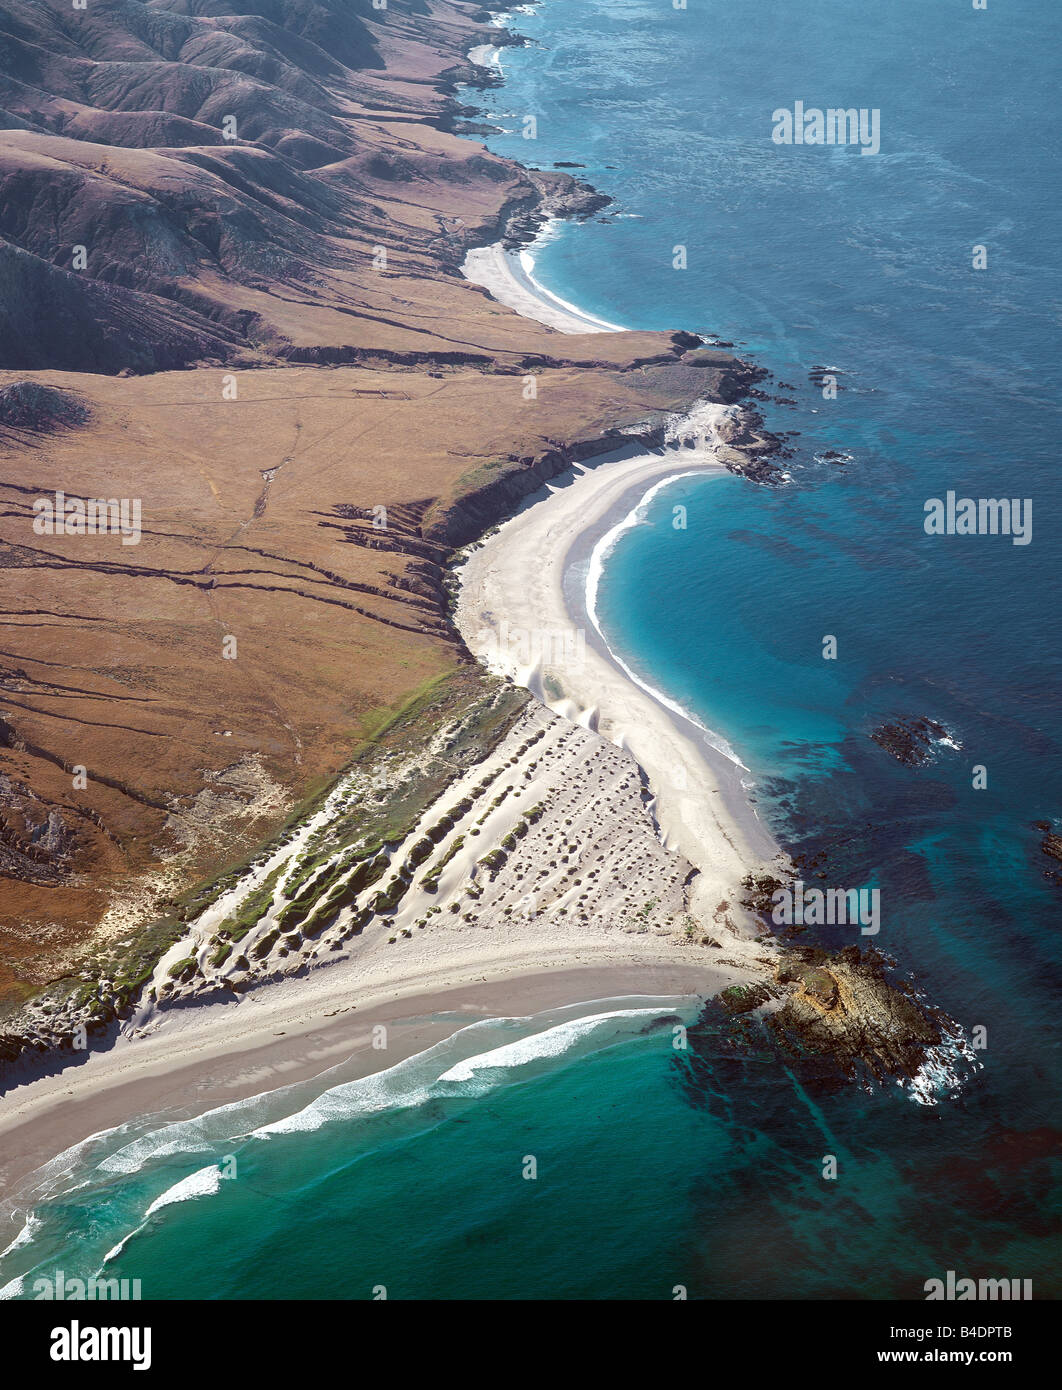 Aerial view of Cluster Point, Santa Rosa Island, Channel Islands National Park, California, USA Stock Photo